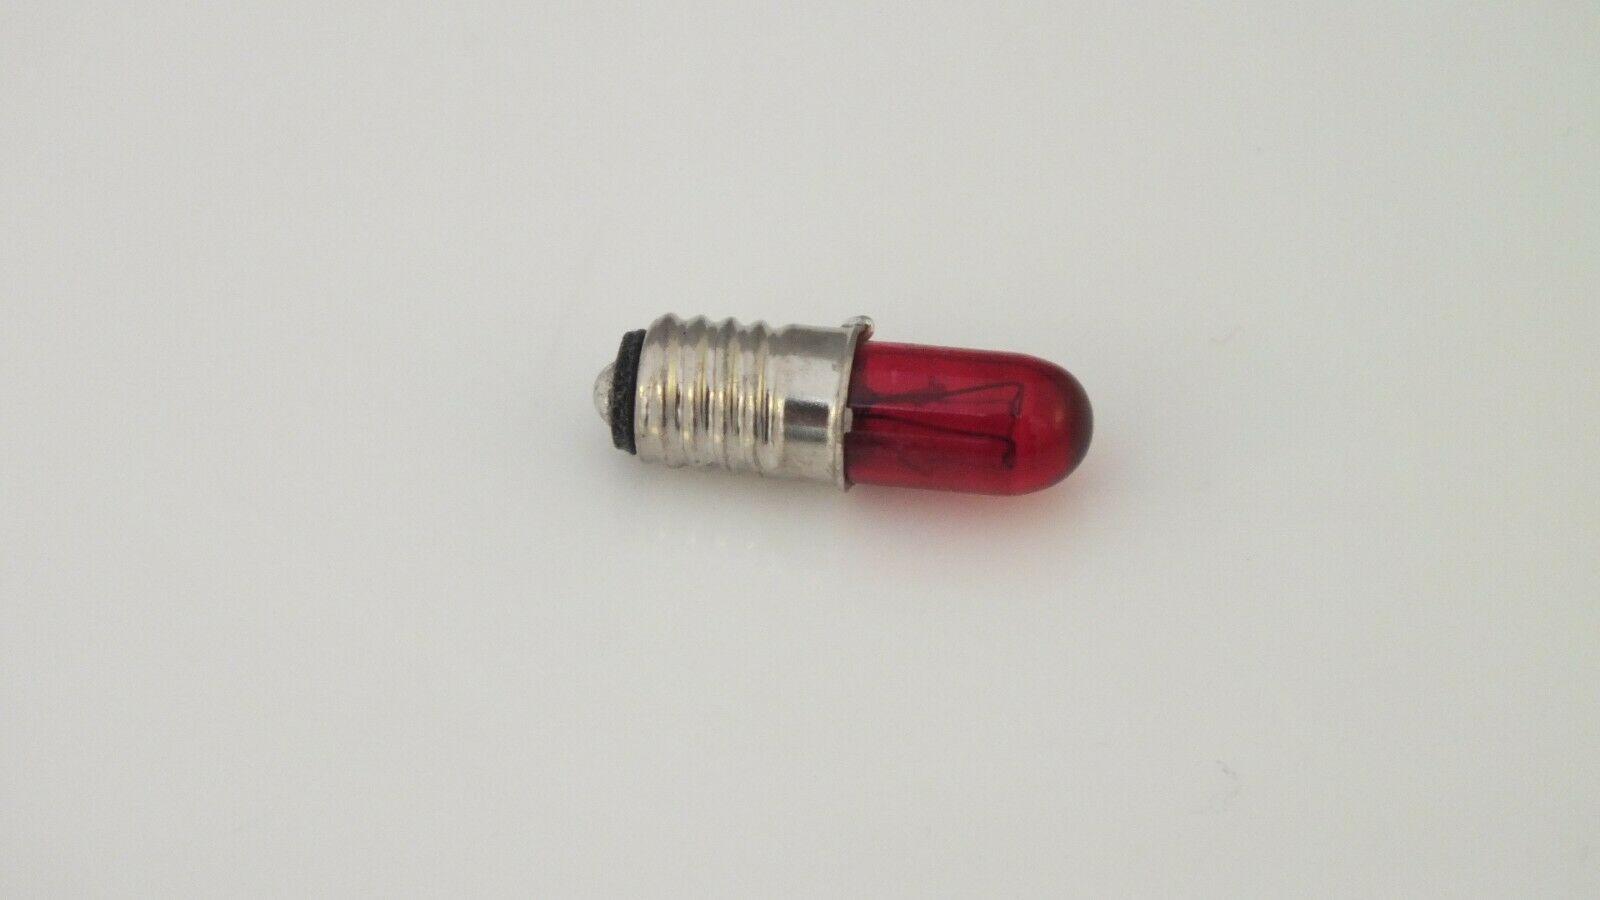 X8170RD/S8718R  # HORNBY TRIANG COLOURED LIGHT  BULB  RED SIGNAL         T3A